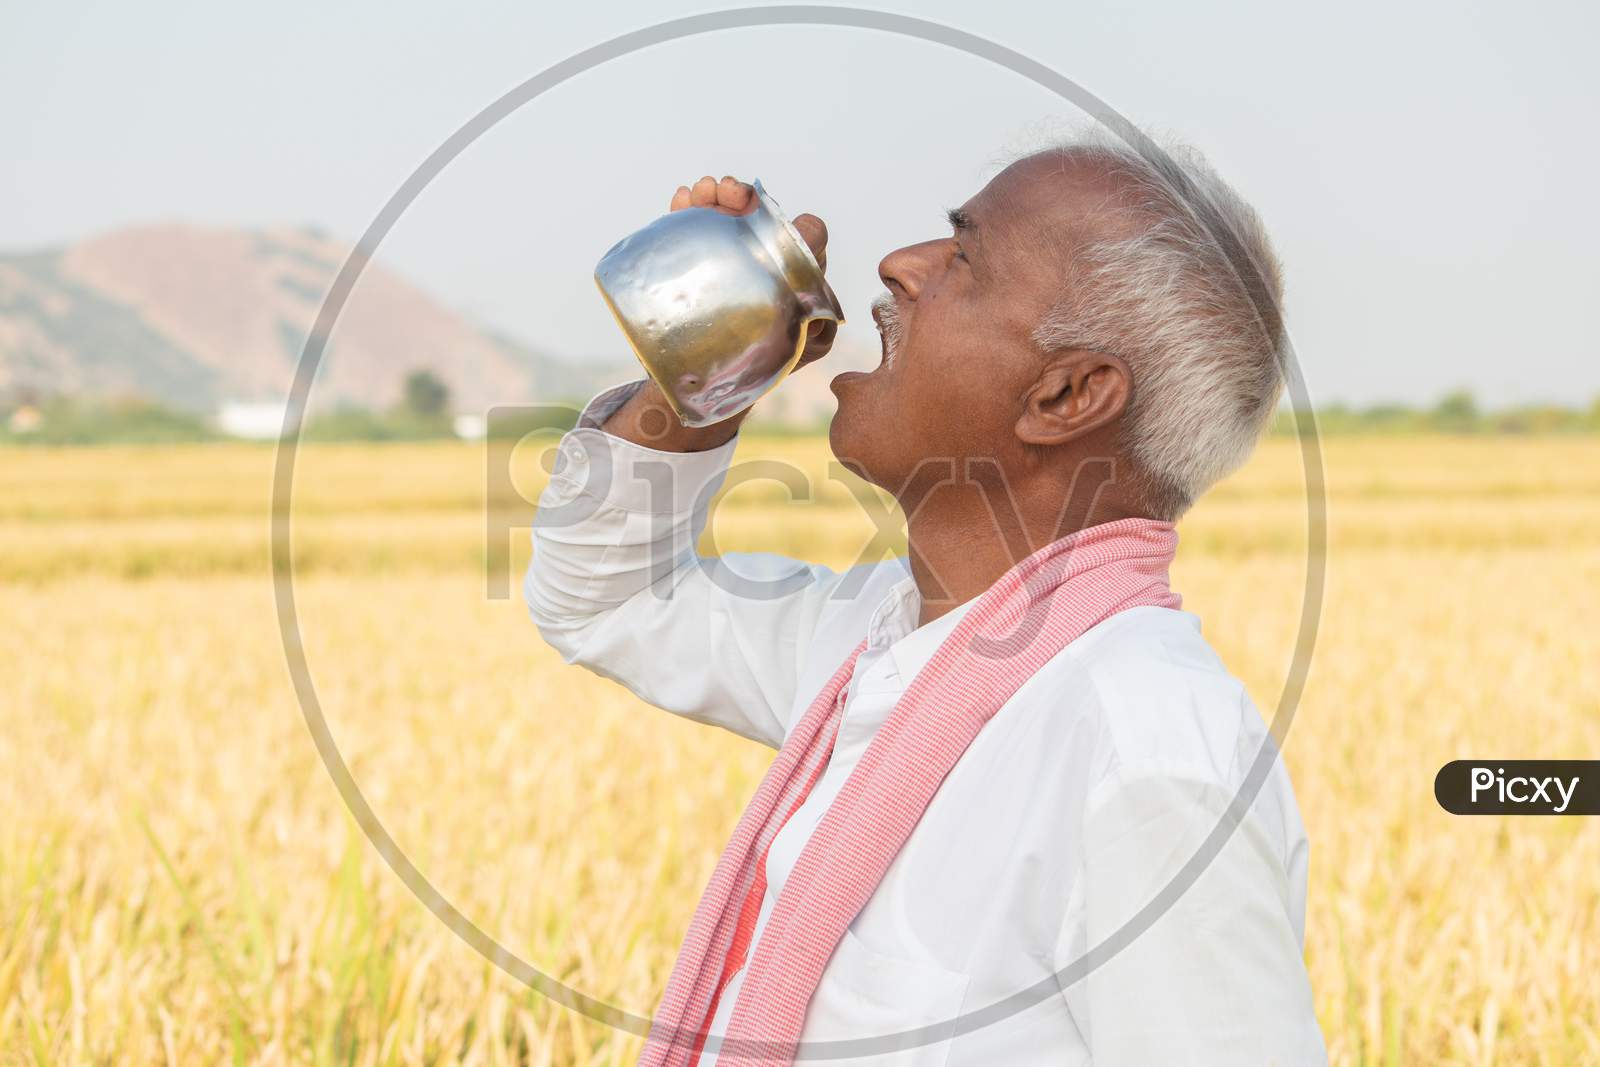 Thirsty Indian Farmer Drinking Water From Steel Tumbler Or Chambu On Hot Sunny Day At Agriculture Field